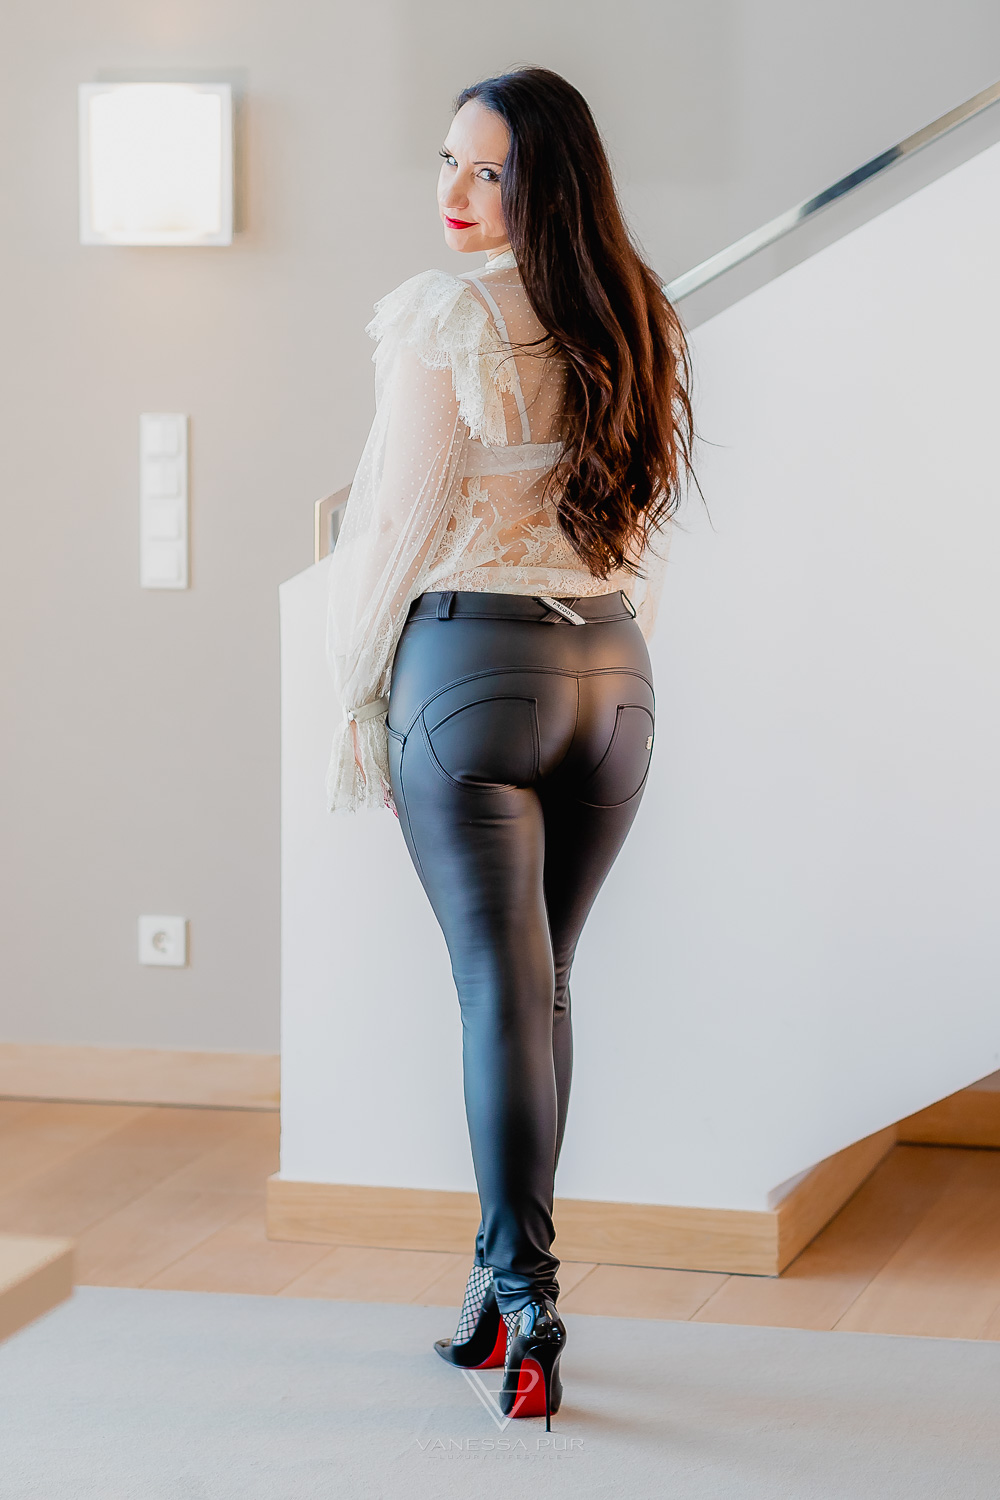 Vanessa Pur - Tight leather pants, transparent blouse and sexy high heels - leather pants outfit - Tight leather pants, transparent blouse with ruffles and sexy high heels in patent with fishnet stockings. My leather pants outfit with ruffle blouse - Confident feminine elegant fashion looks with high heels